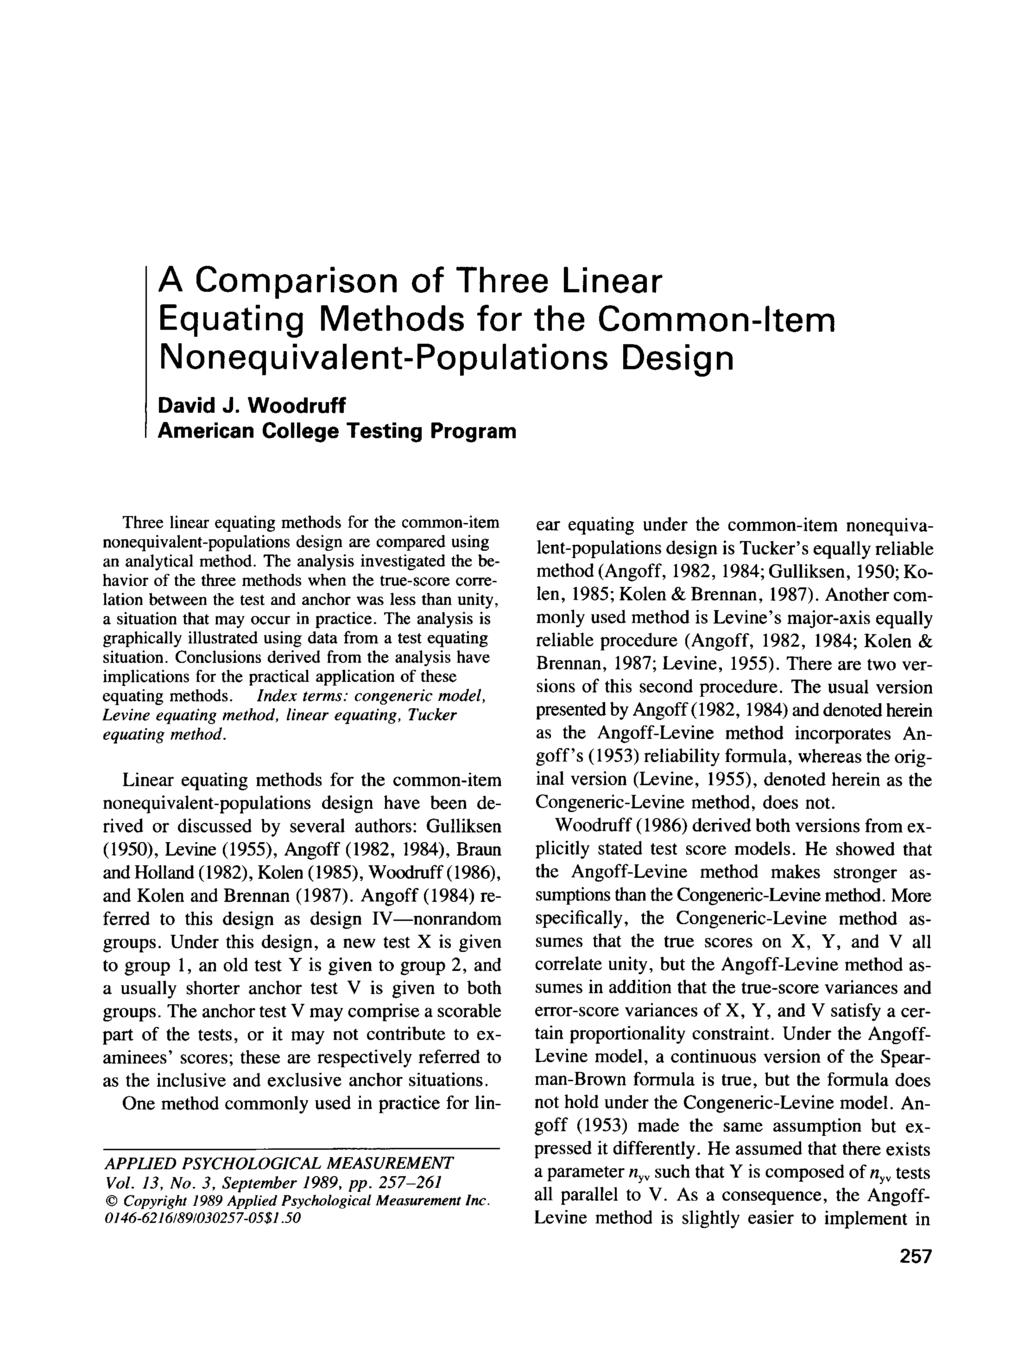 A Comparison of Three Linear Equating Methods for the Common-Item Nonequivalent-Populations Design David J.